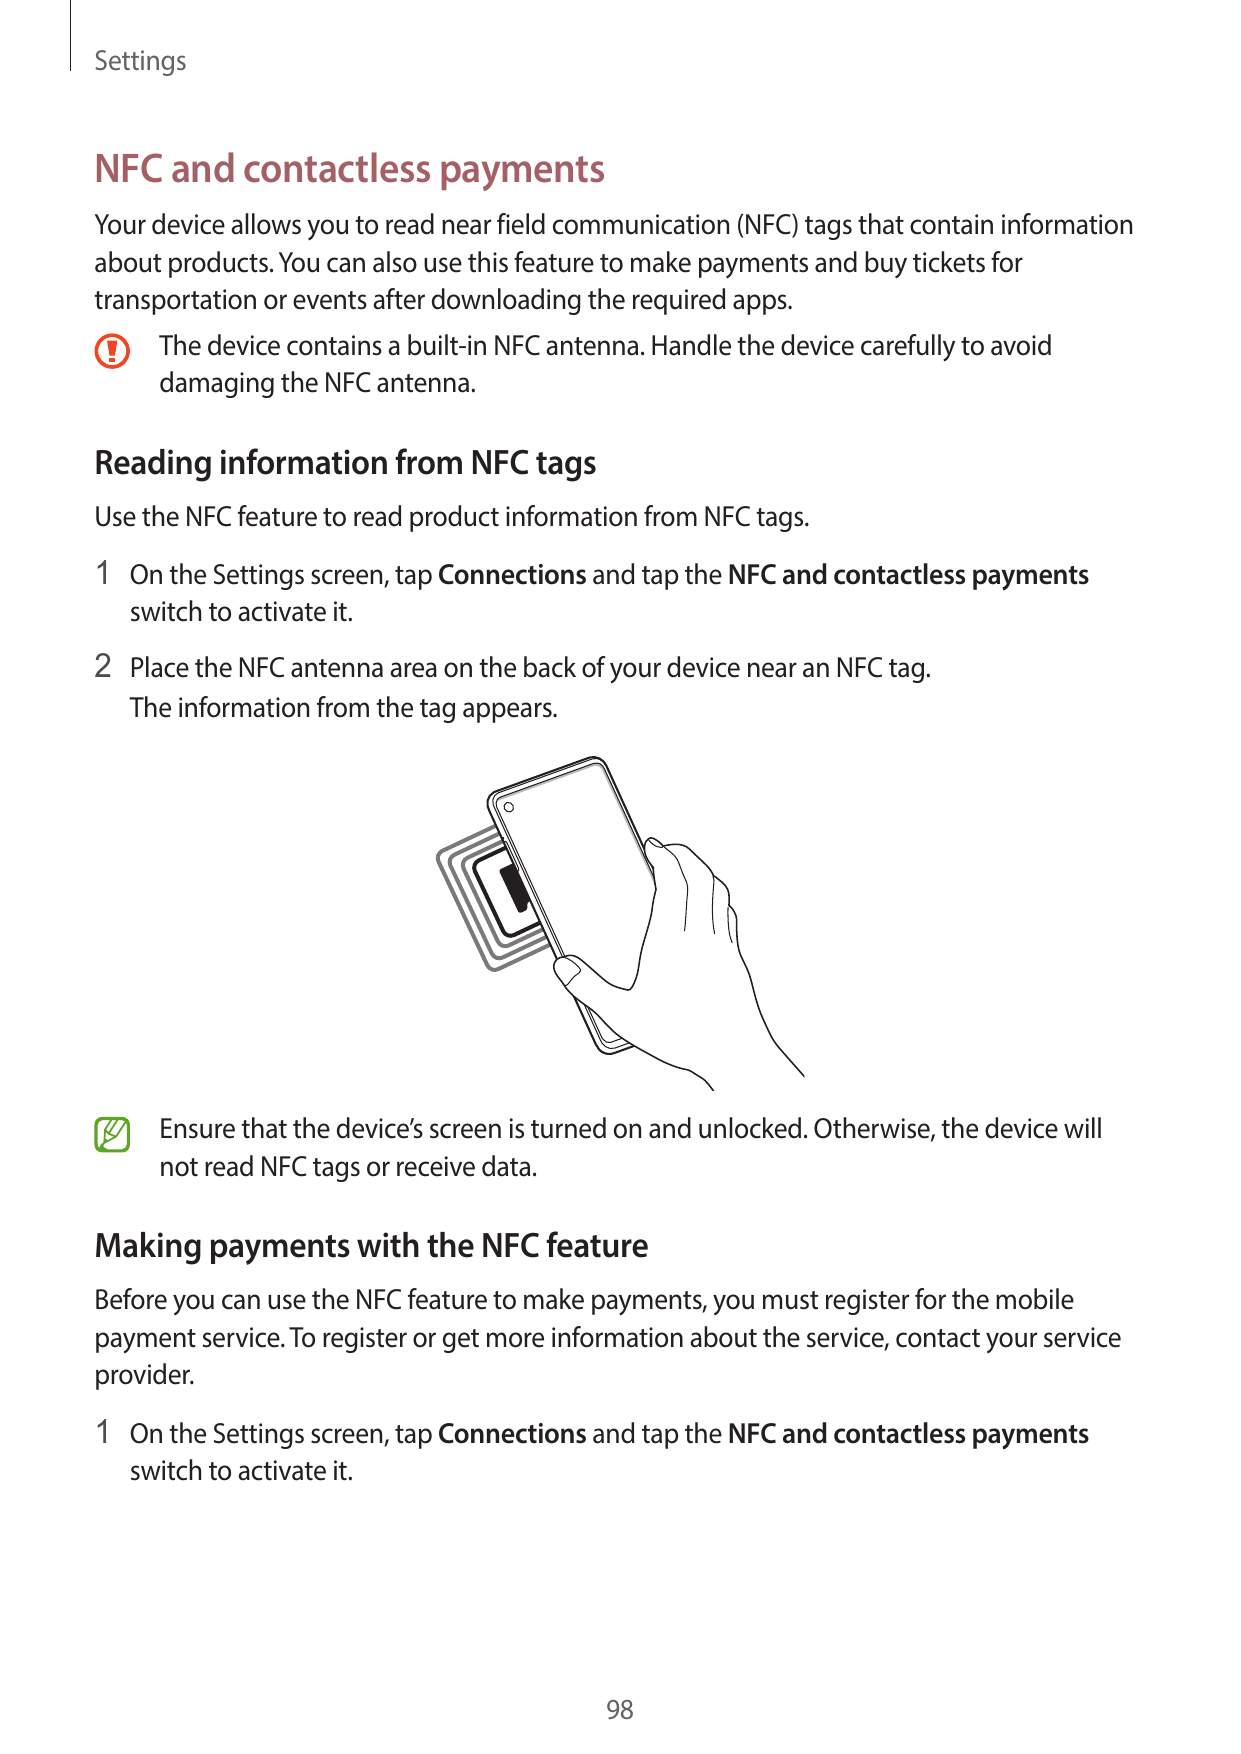 SettingsNFC and contactless paymentsYour device allows you to read near field communication (NFC) tags that contain informationa